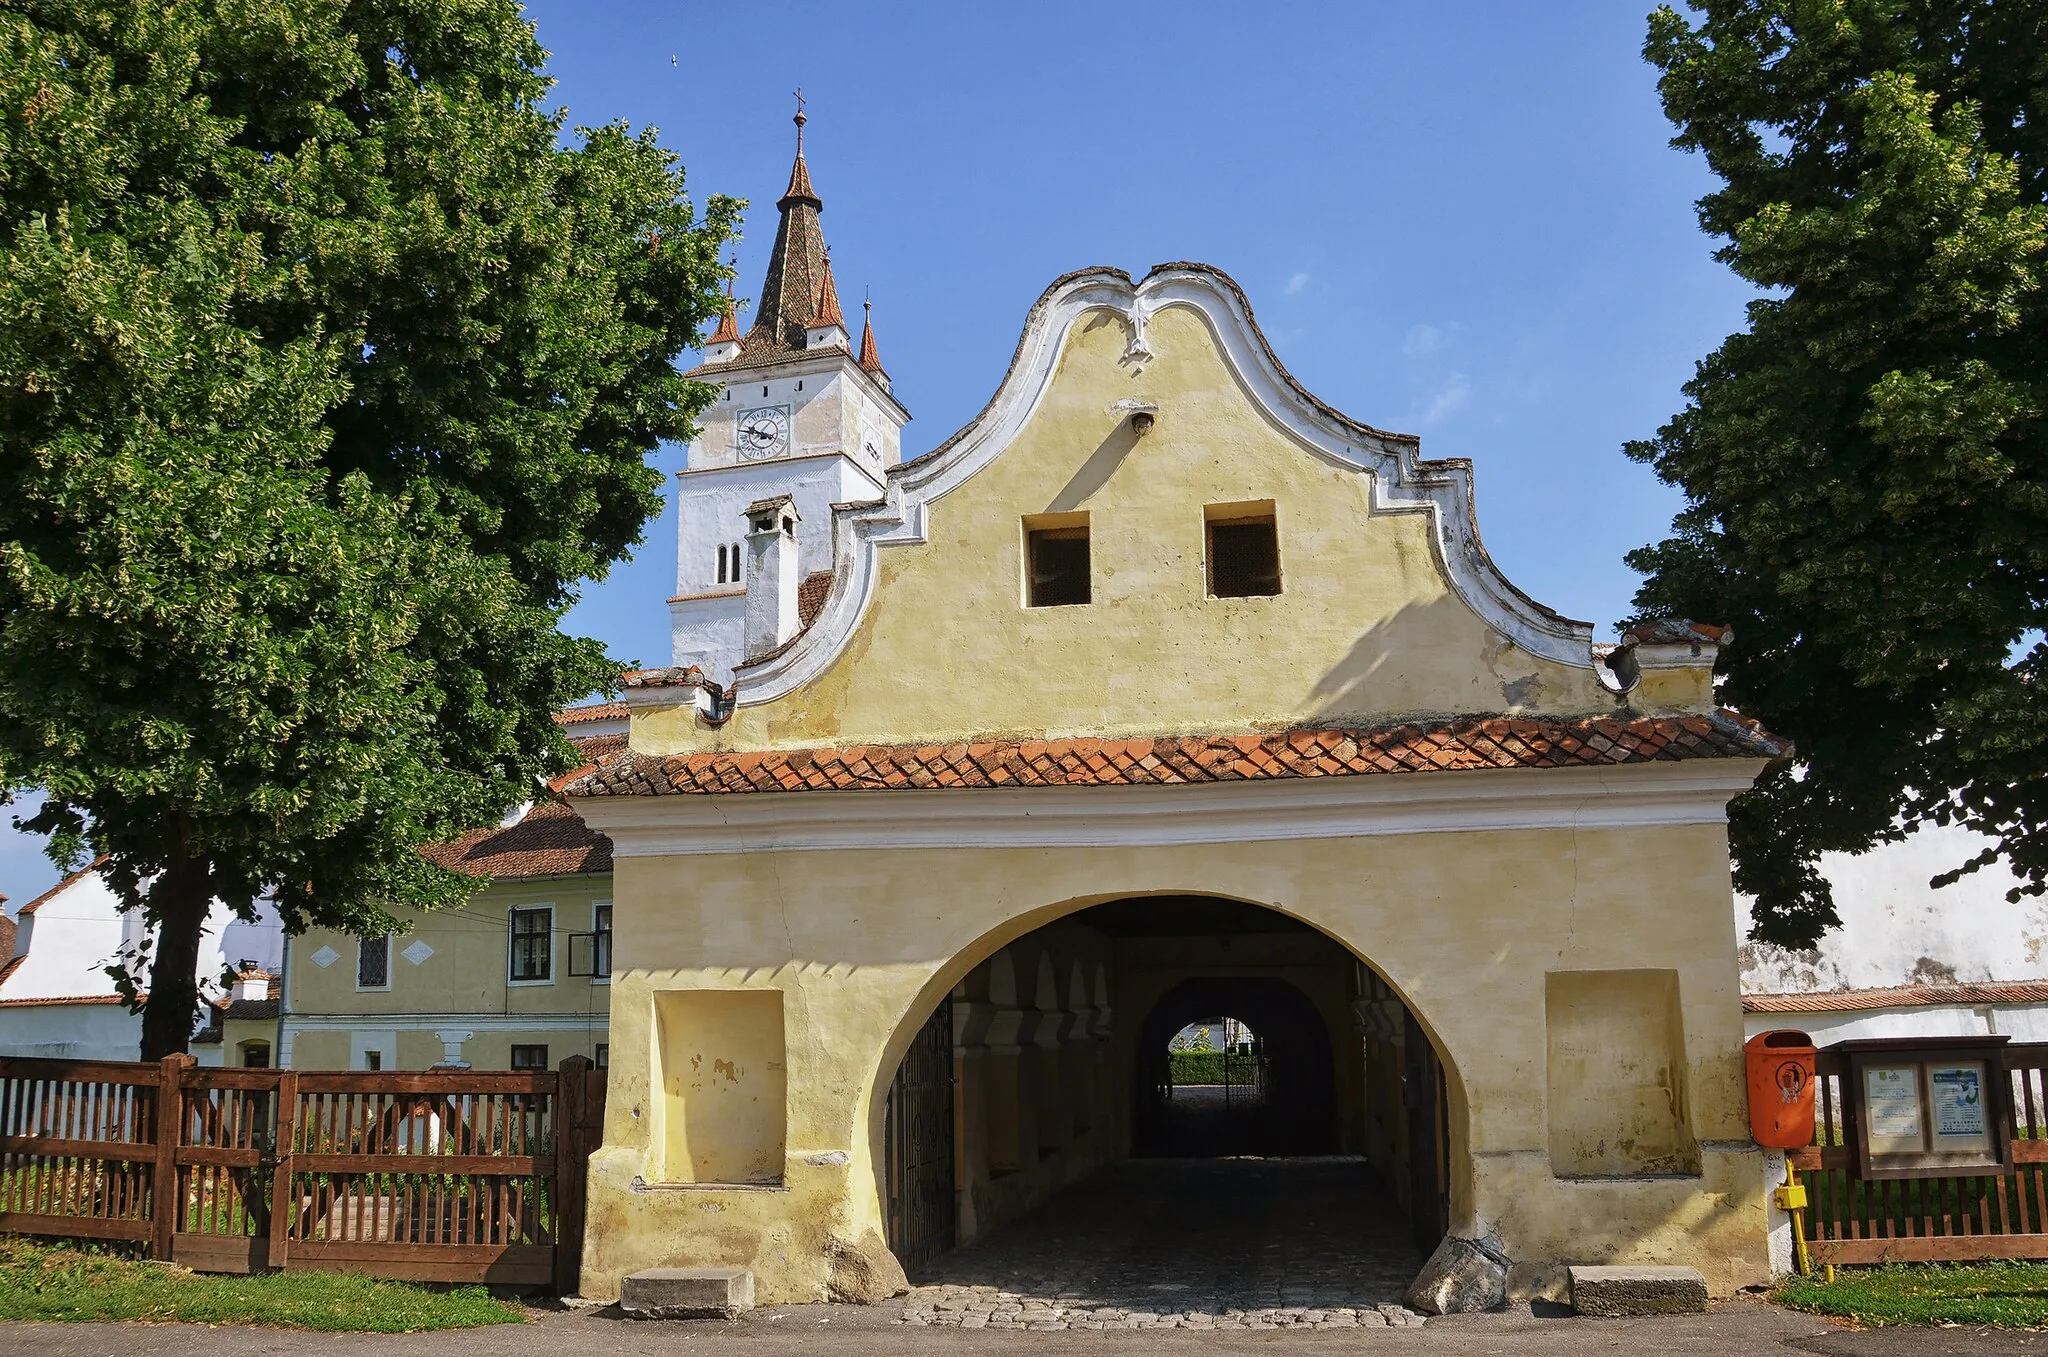 Photo showing: The entrance building of the Hărman fortified church